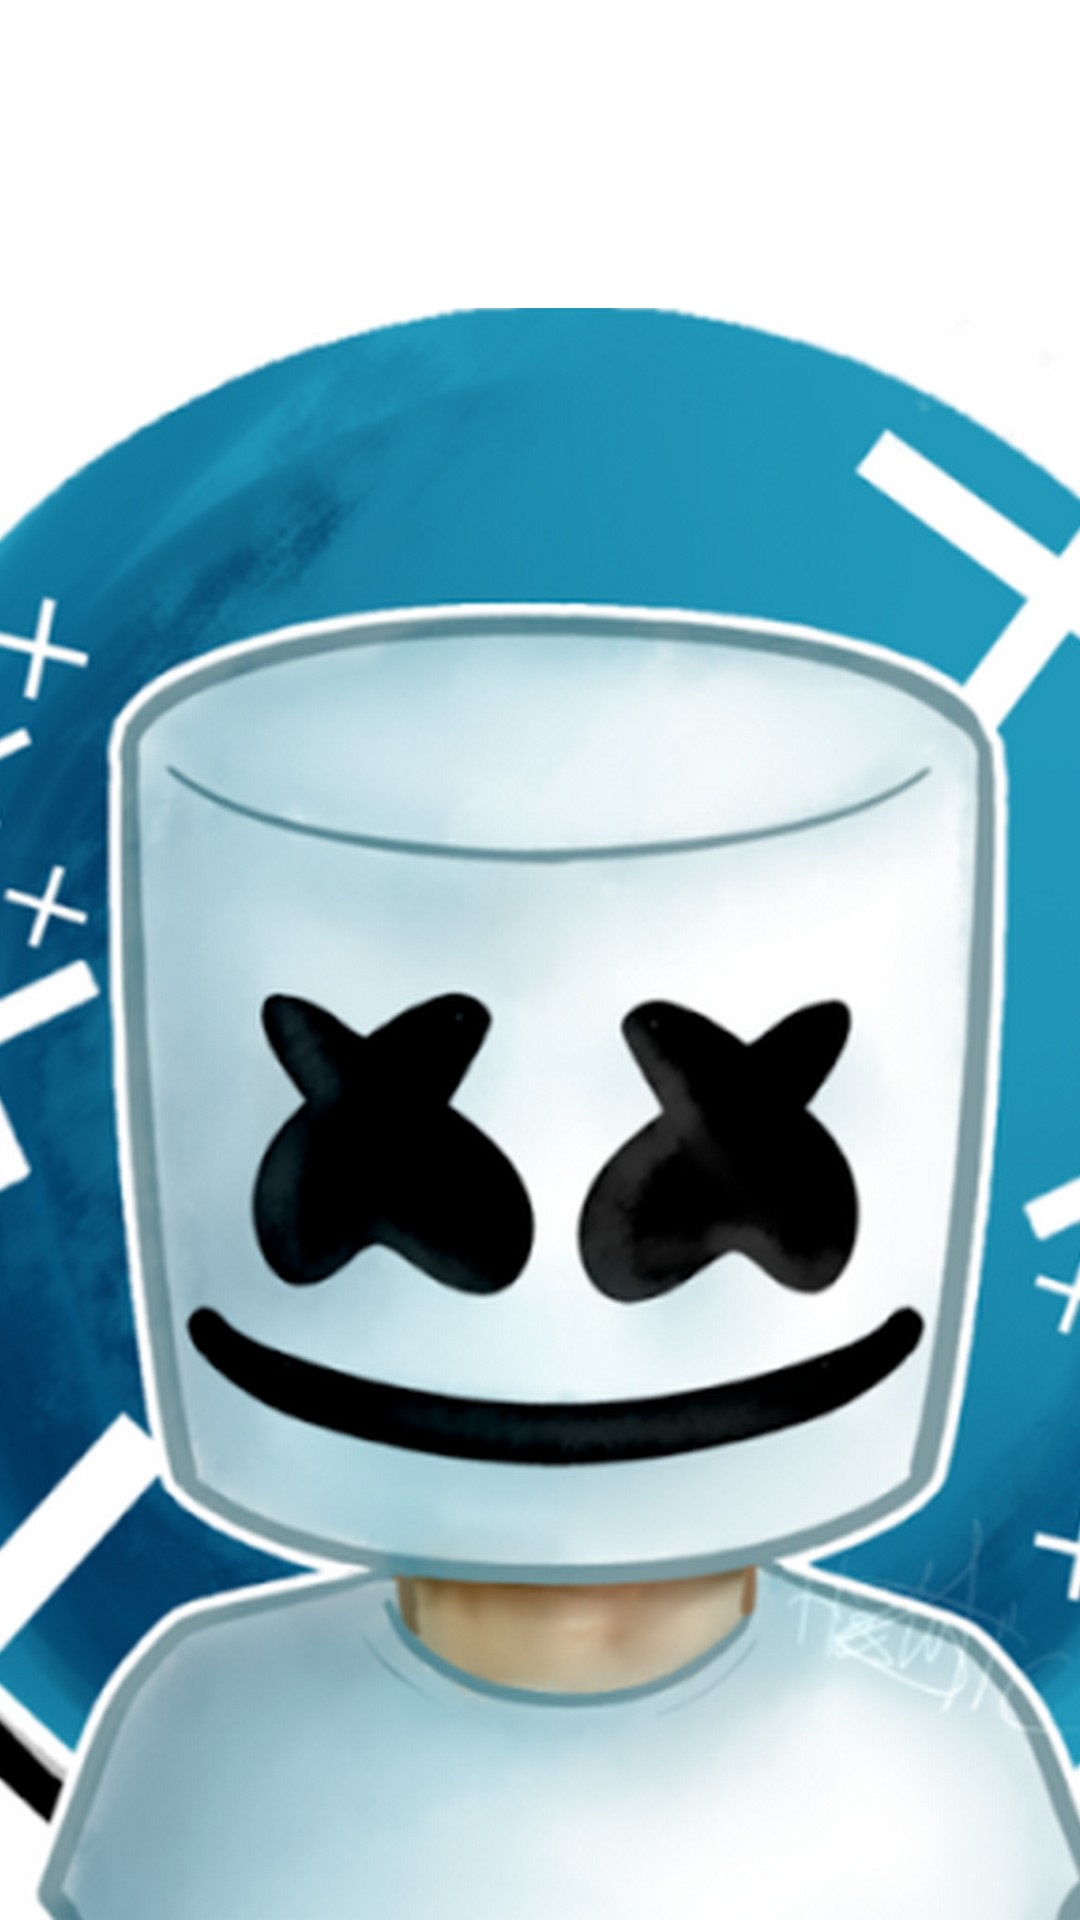 Marshmello Wallpaper iPhone With high-resolution 1080X1920 pixel. You can use this wallpaper for your iPhone 5, 6, 7, 8, X, XS, XR backgrounds, Mobile Screensaver, or iPad Lock Screen